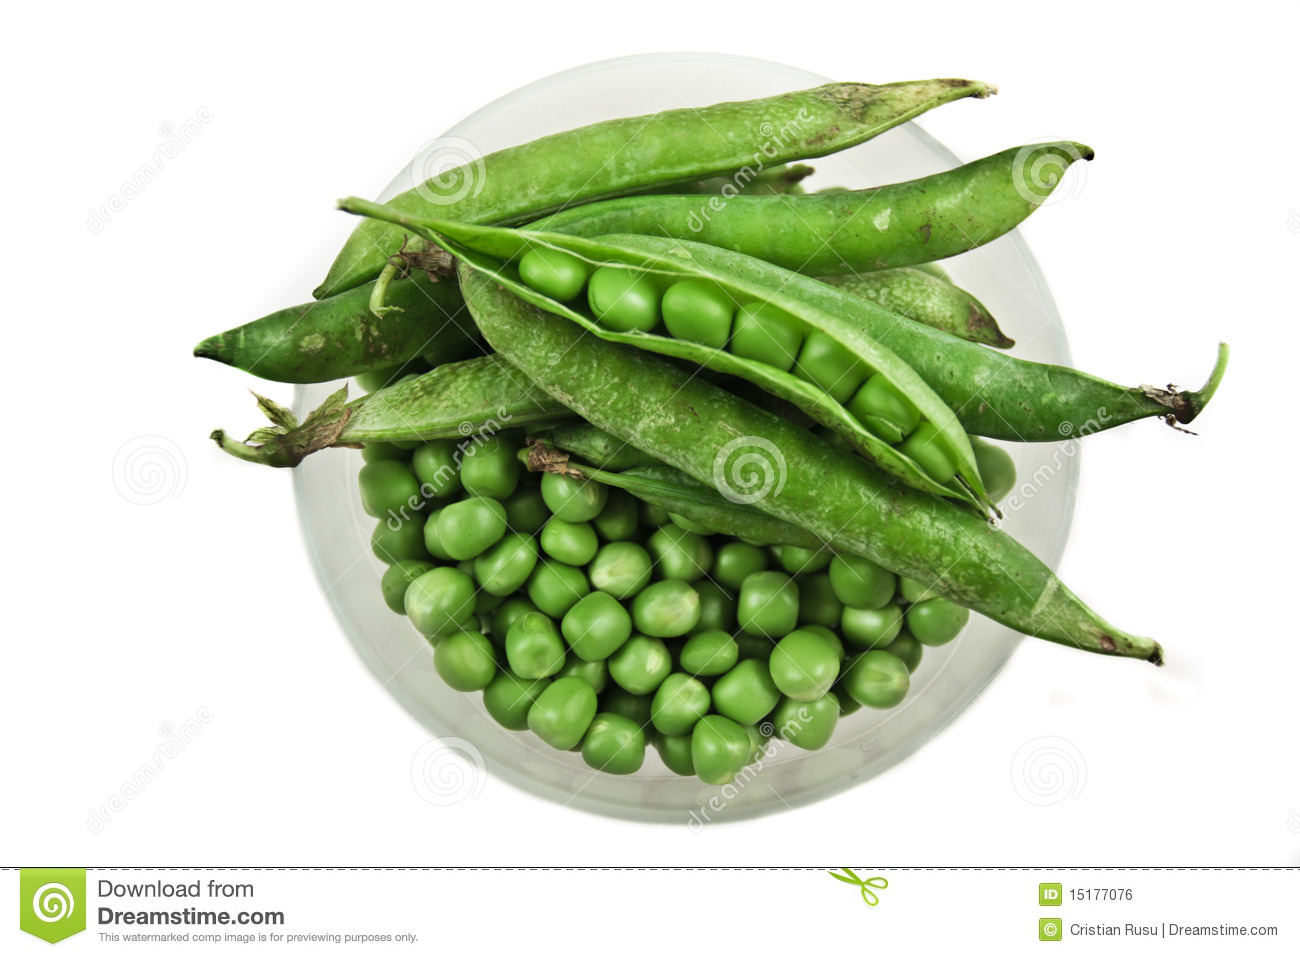 Green Peas In A Bowl Royalty Free Stock Image   Image  15177076